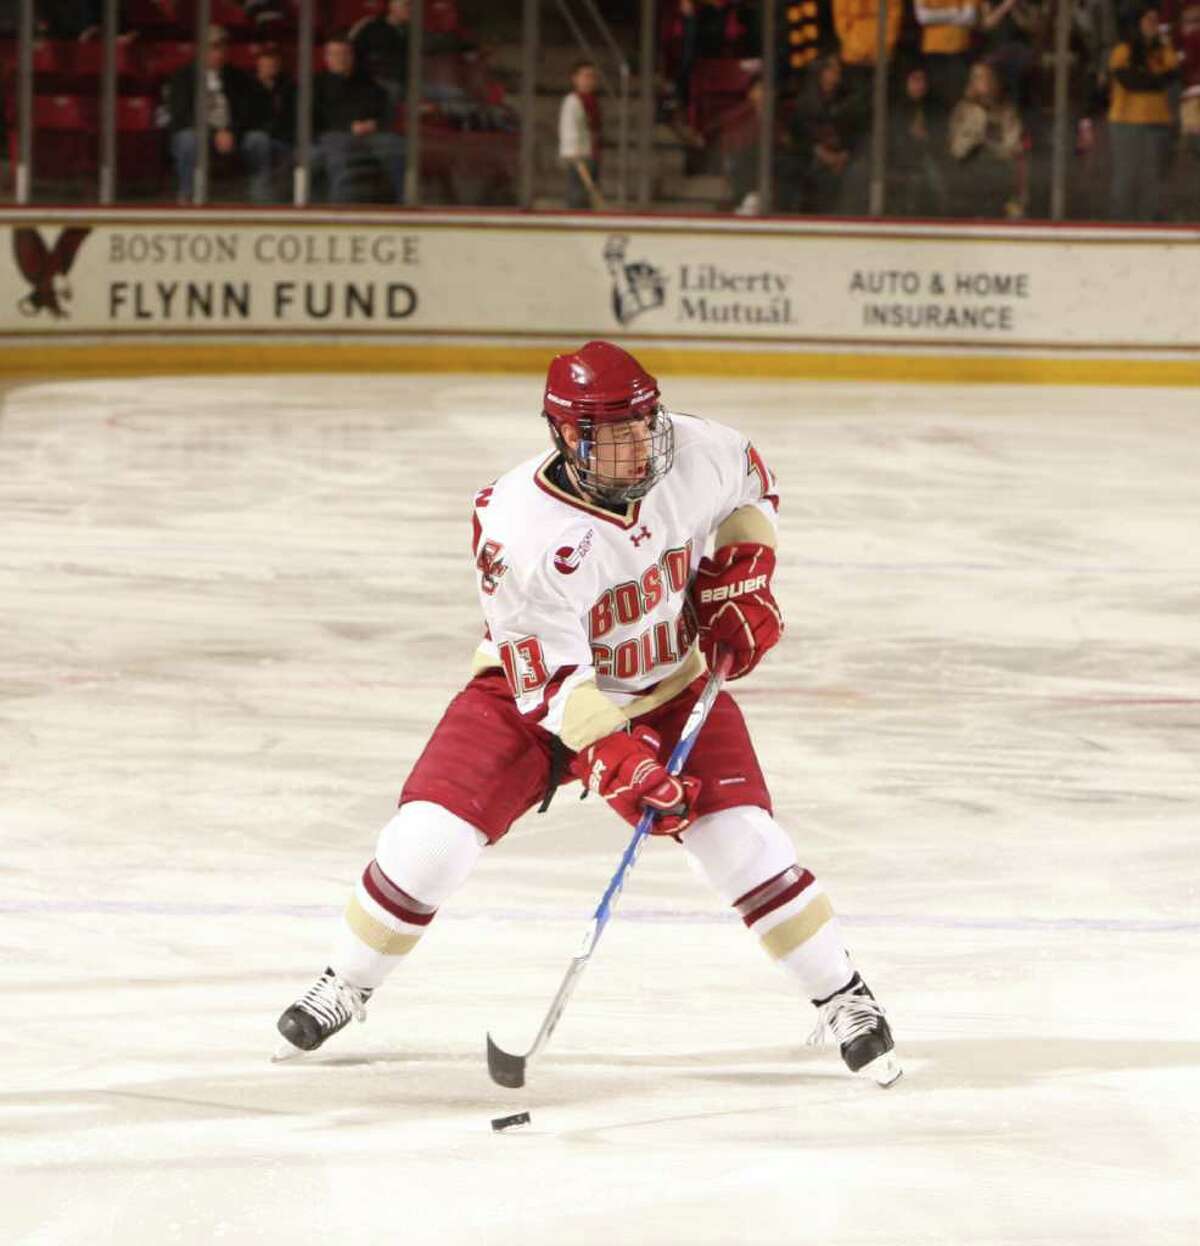 Greenwich's Atkinson, a Hobey Baker finalist, has BC primed for